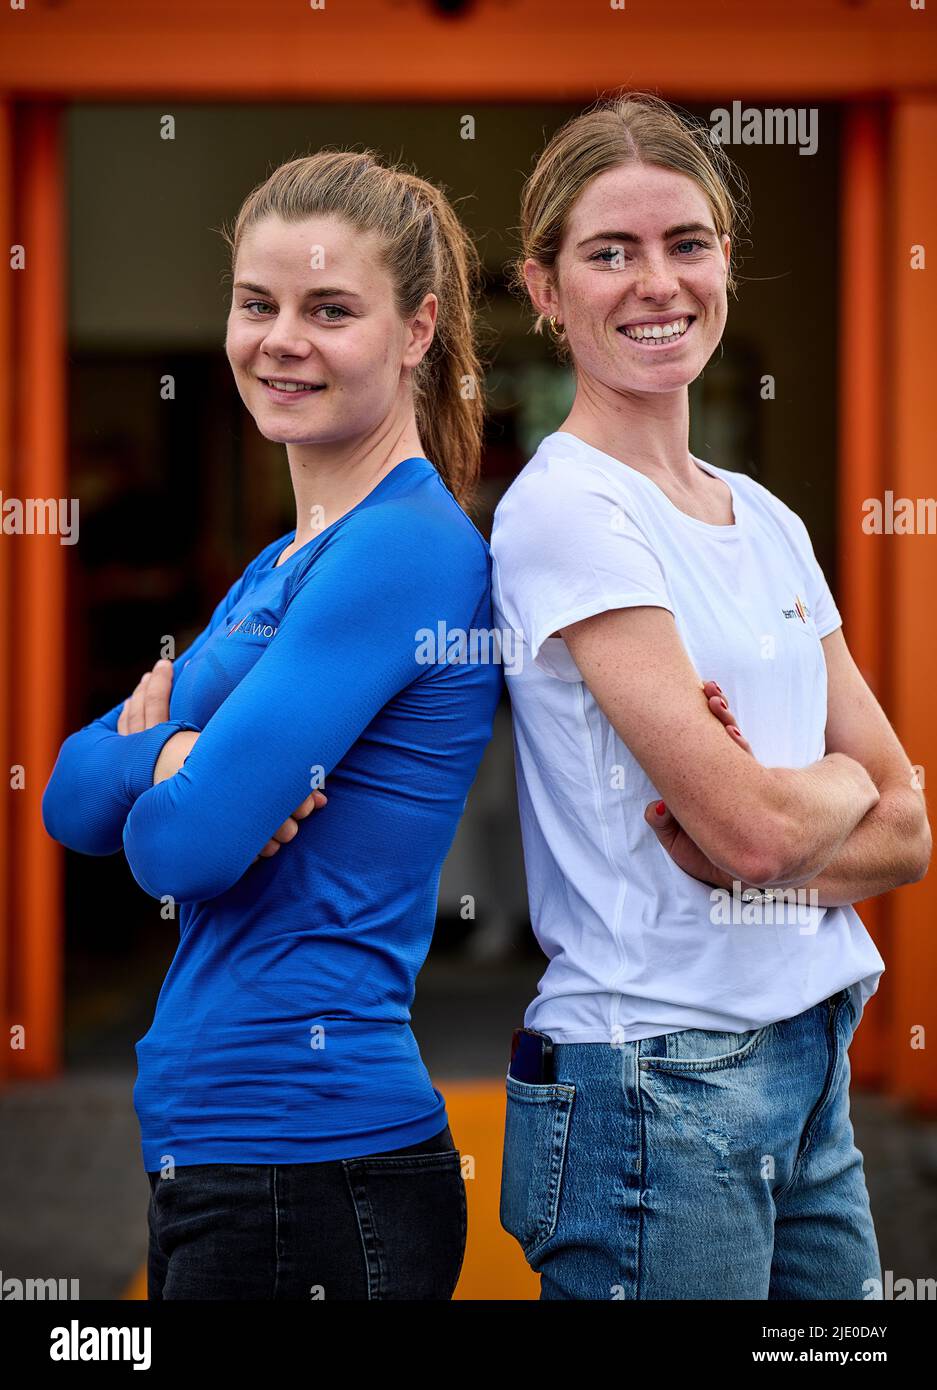 2022-06-24 11:41:34 ROOSENDAAL - Lotte Kopecky (L) and Demi Vollering  during a press conference of Team SD Worx in the run-up to the first  edition of the Tour de Fance Femmes. The